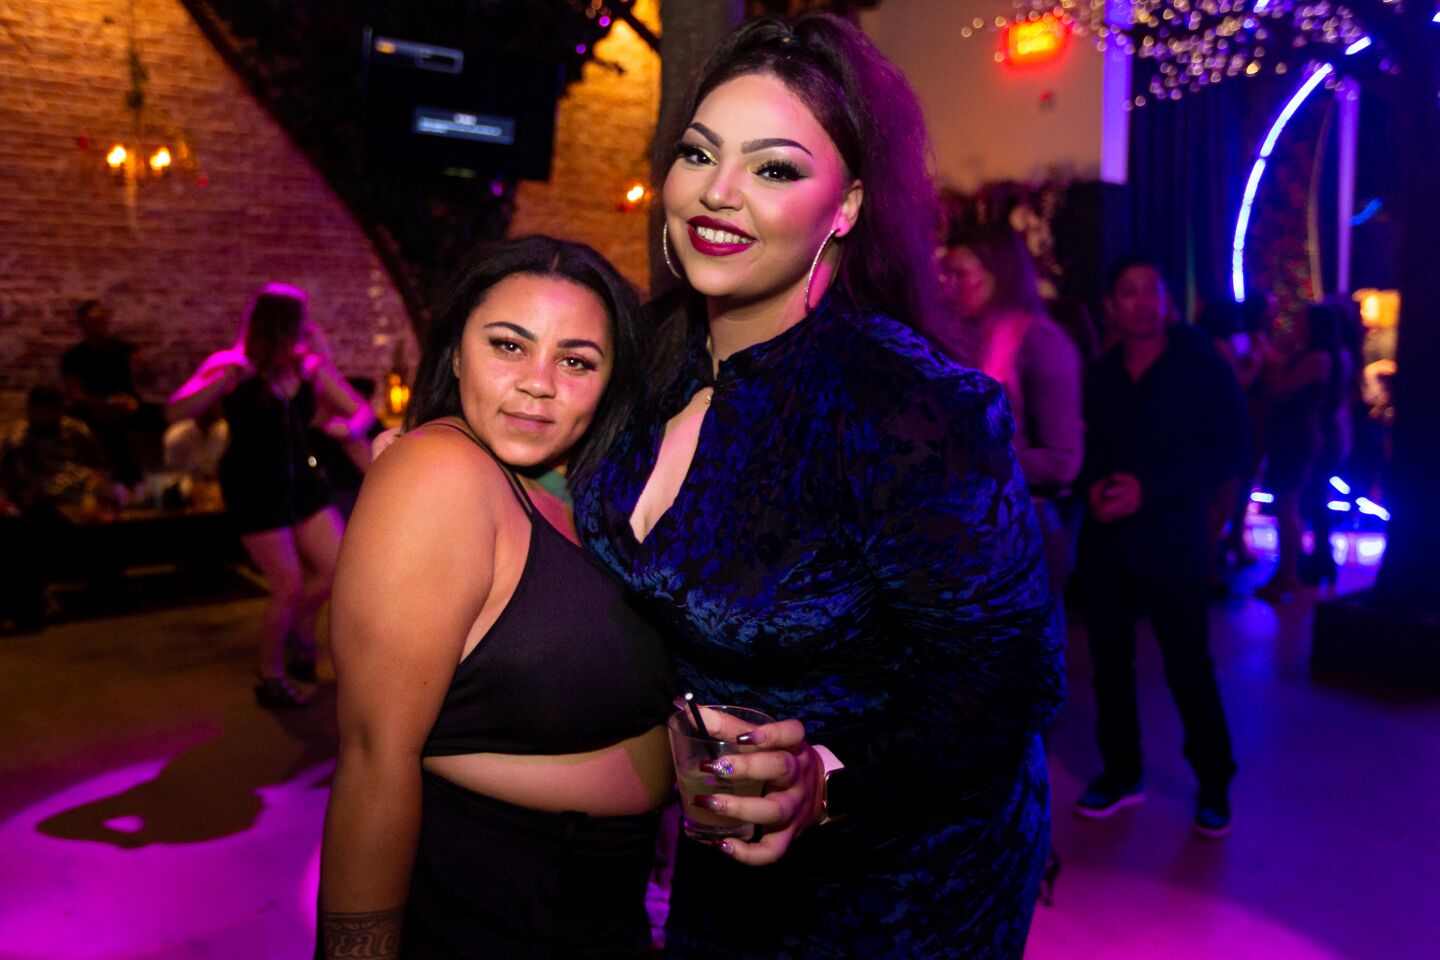 Parq nightclub pulled out all the stops to celebrate five years in San Diego with Saweetie and Trey Songz on Friday, Dec. 6, 2019.